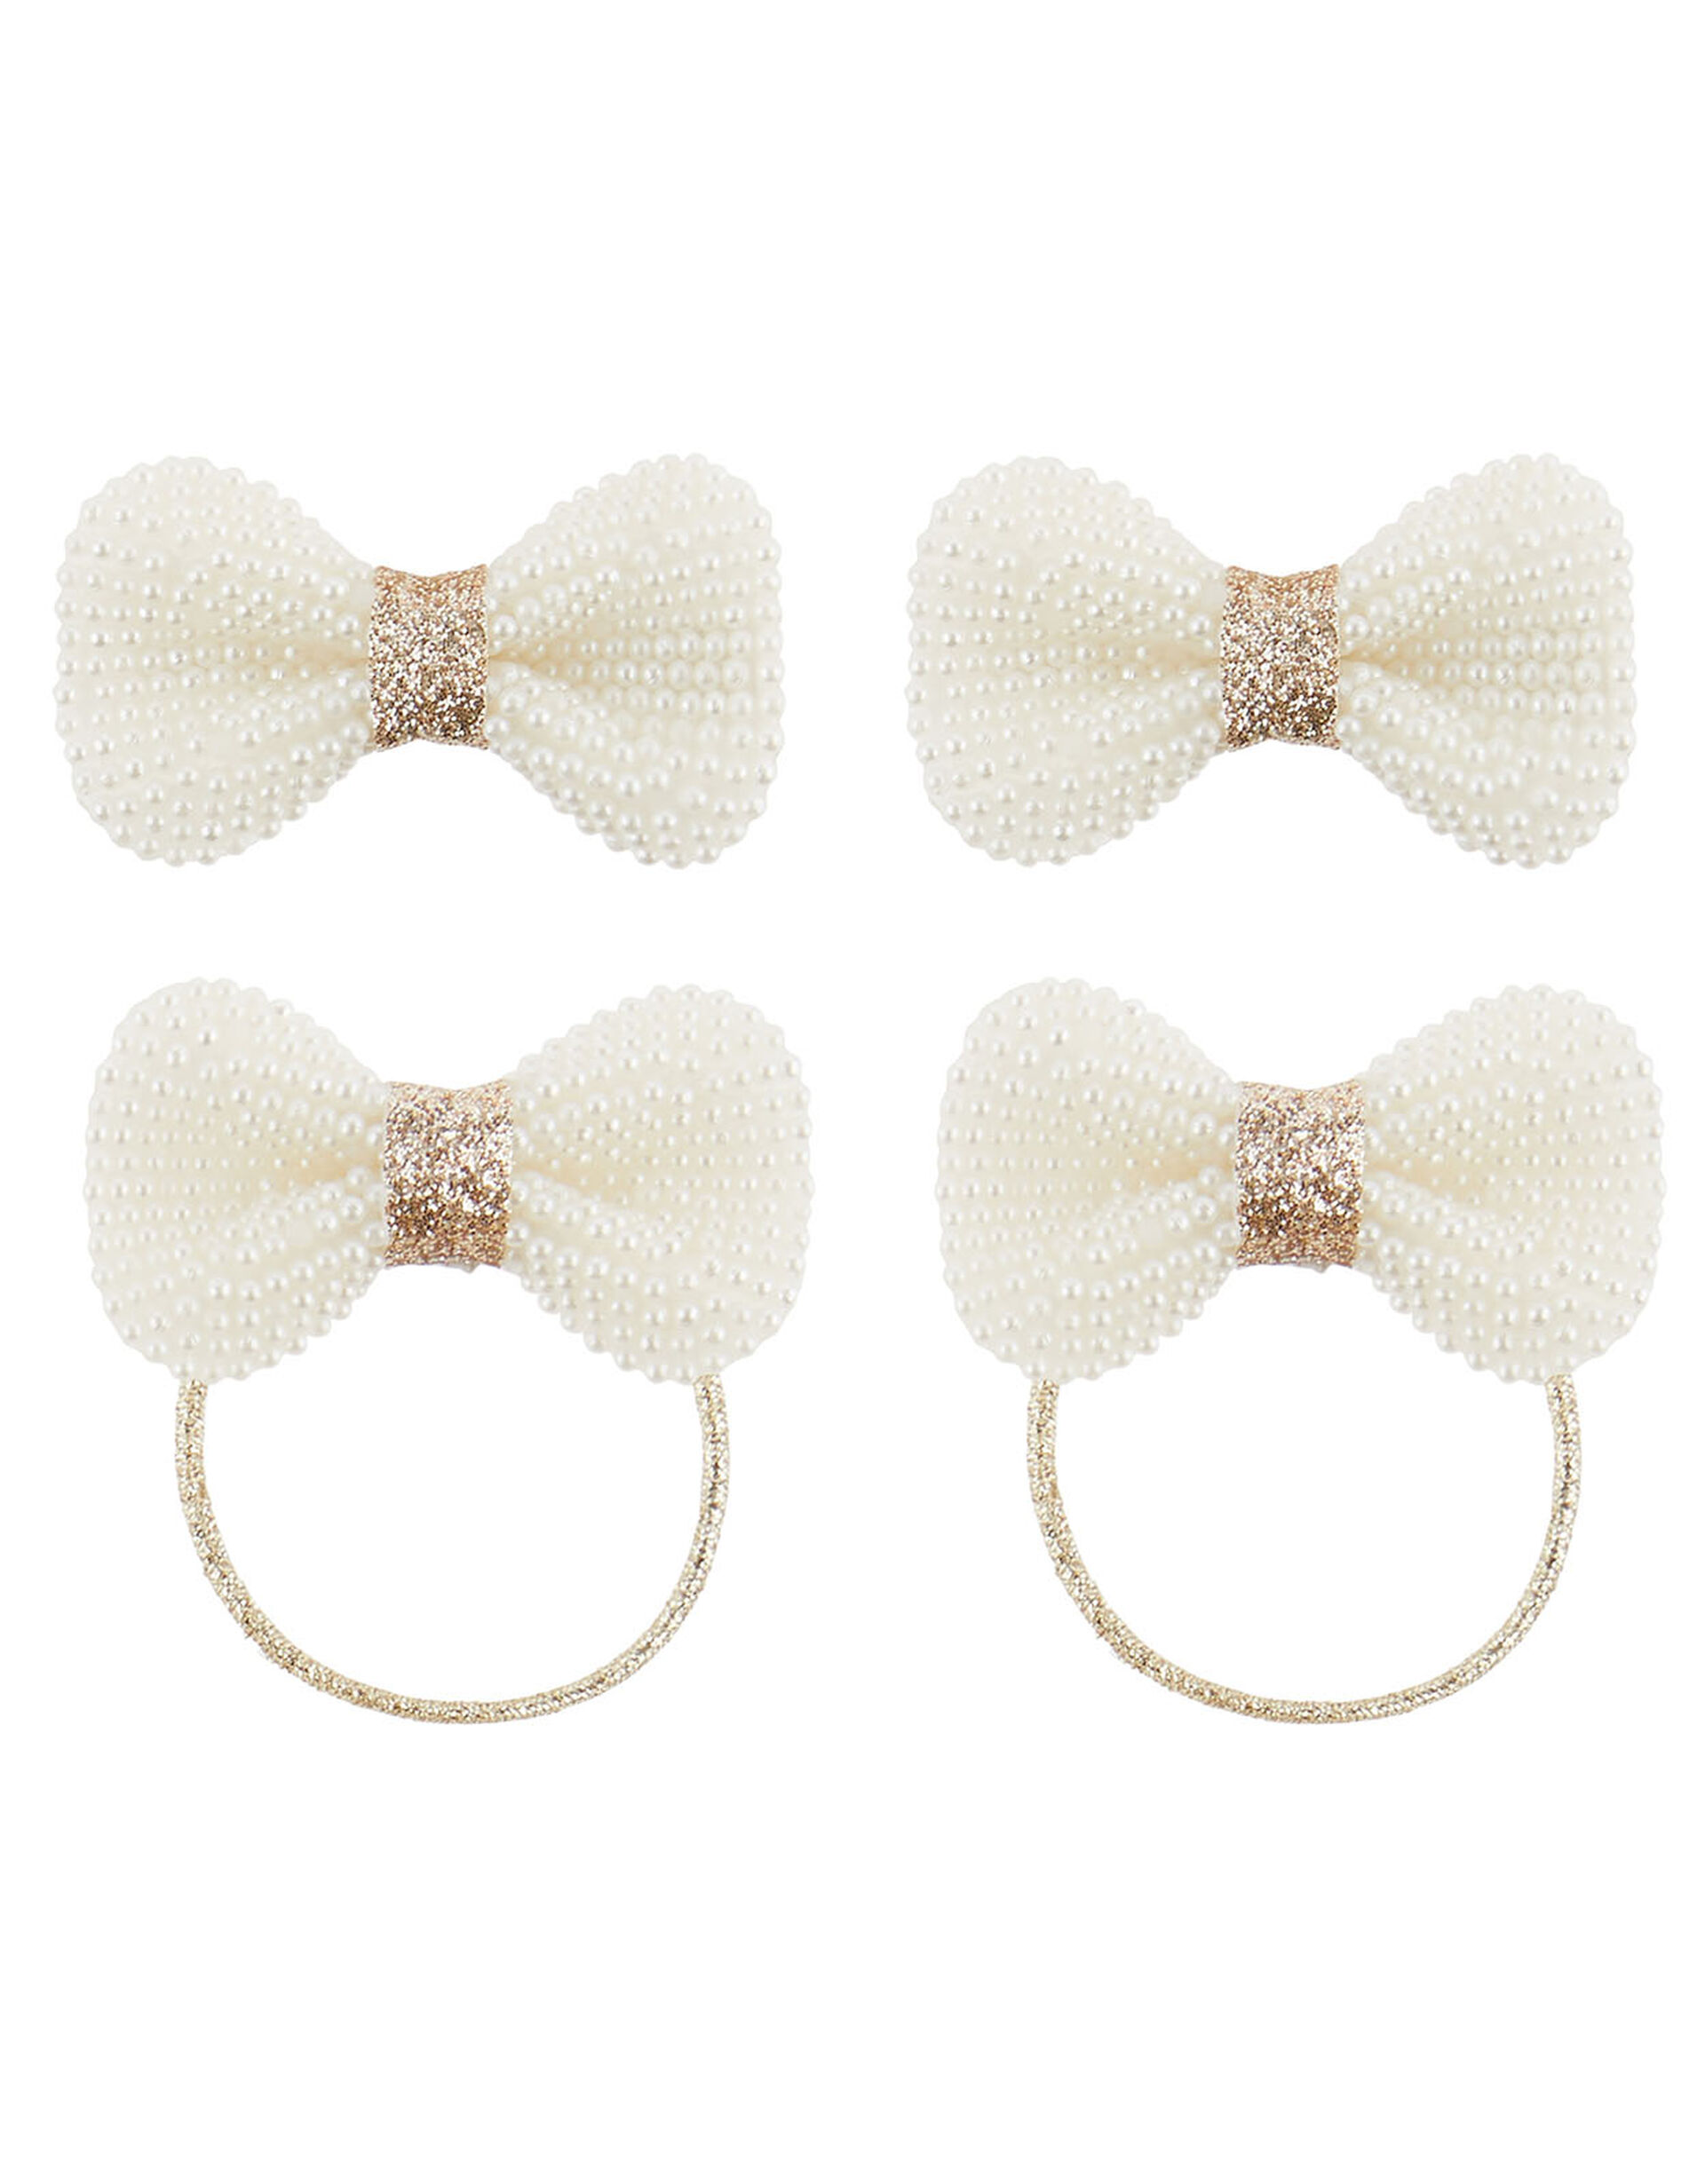 Pearly Bow Hair Accessory Set, , large